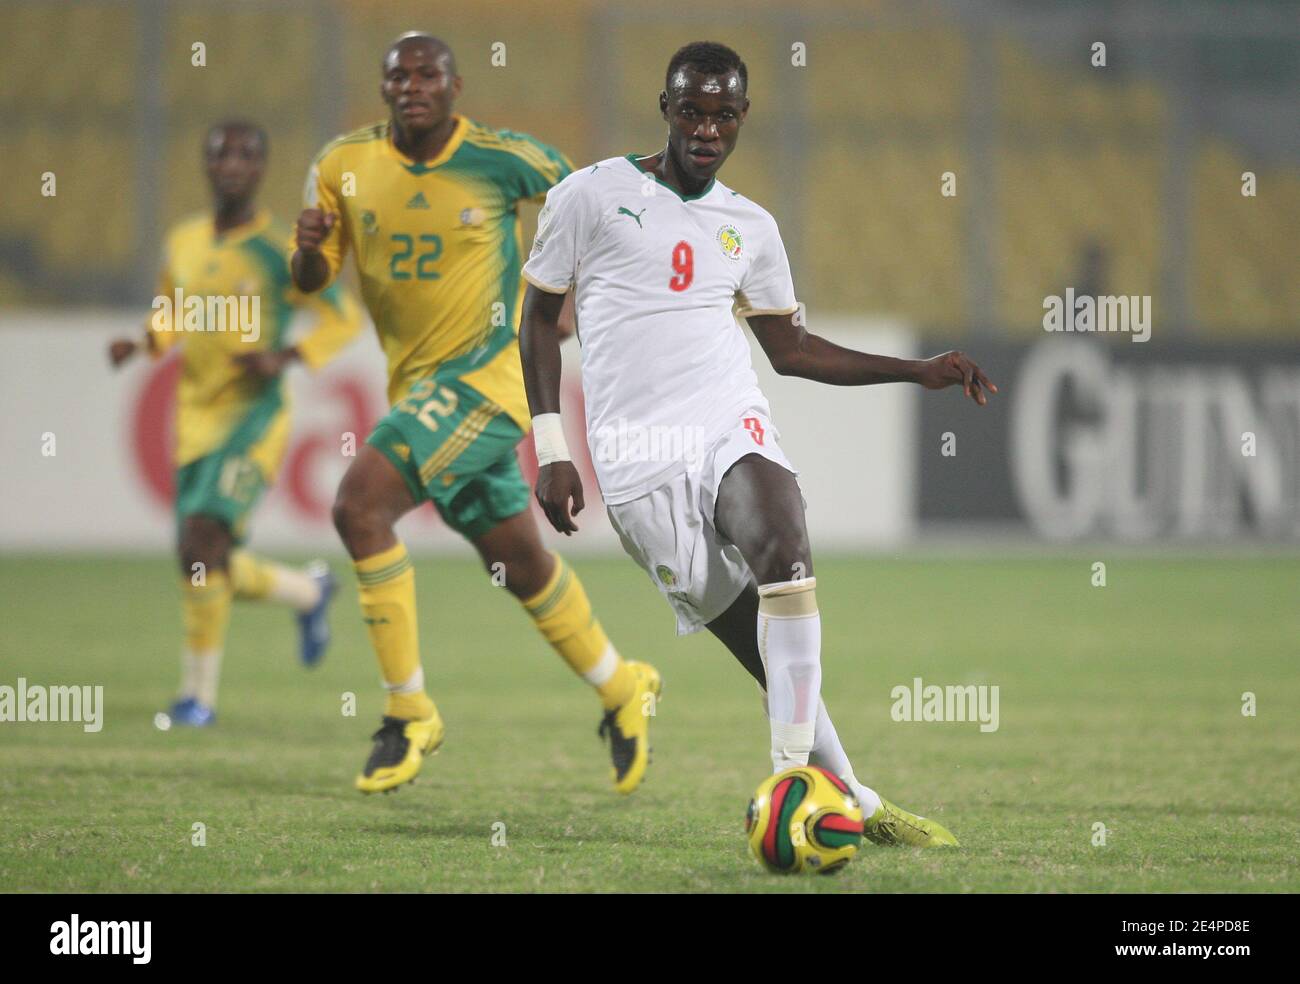 Senegal's Babacar MBaye Gueye during the African Cup of Nations soccer match, Senegal vs South Africa in Kumasi, Ghana on January 31, 2008. The match ended in a 1-1 draw. Senegal failed to qualify for the next round of the competition. Photo by Steeve McMay/Cameleon/ABACAPRESS.COM Stock Photo